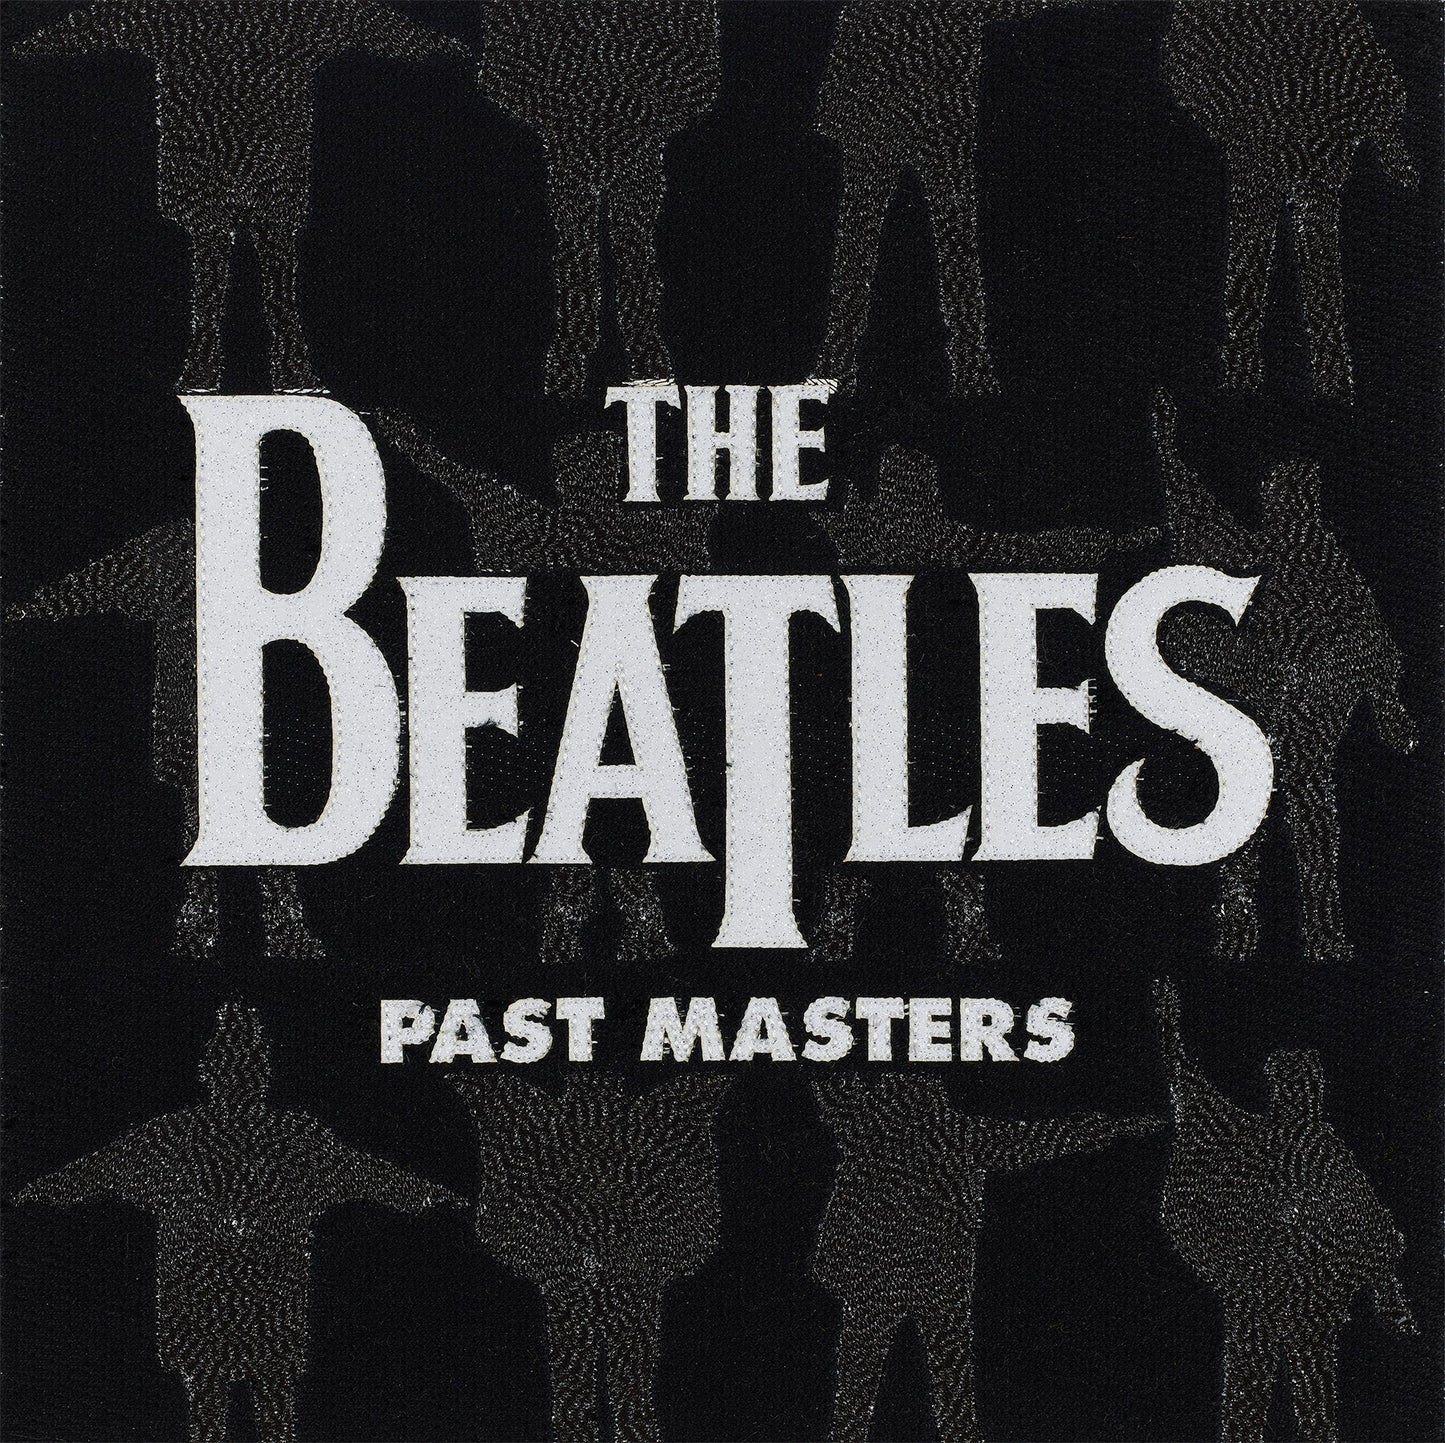 Past Masters, The Beatles - 3 by Stephen Wilson (12x12x2")